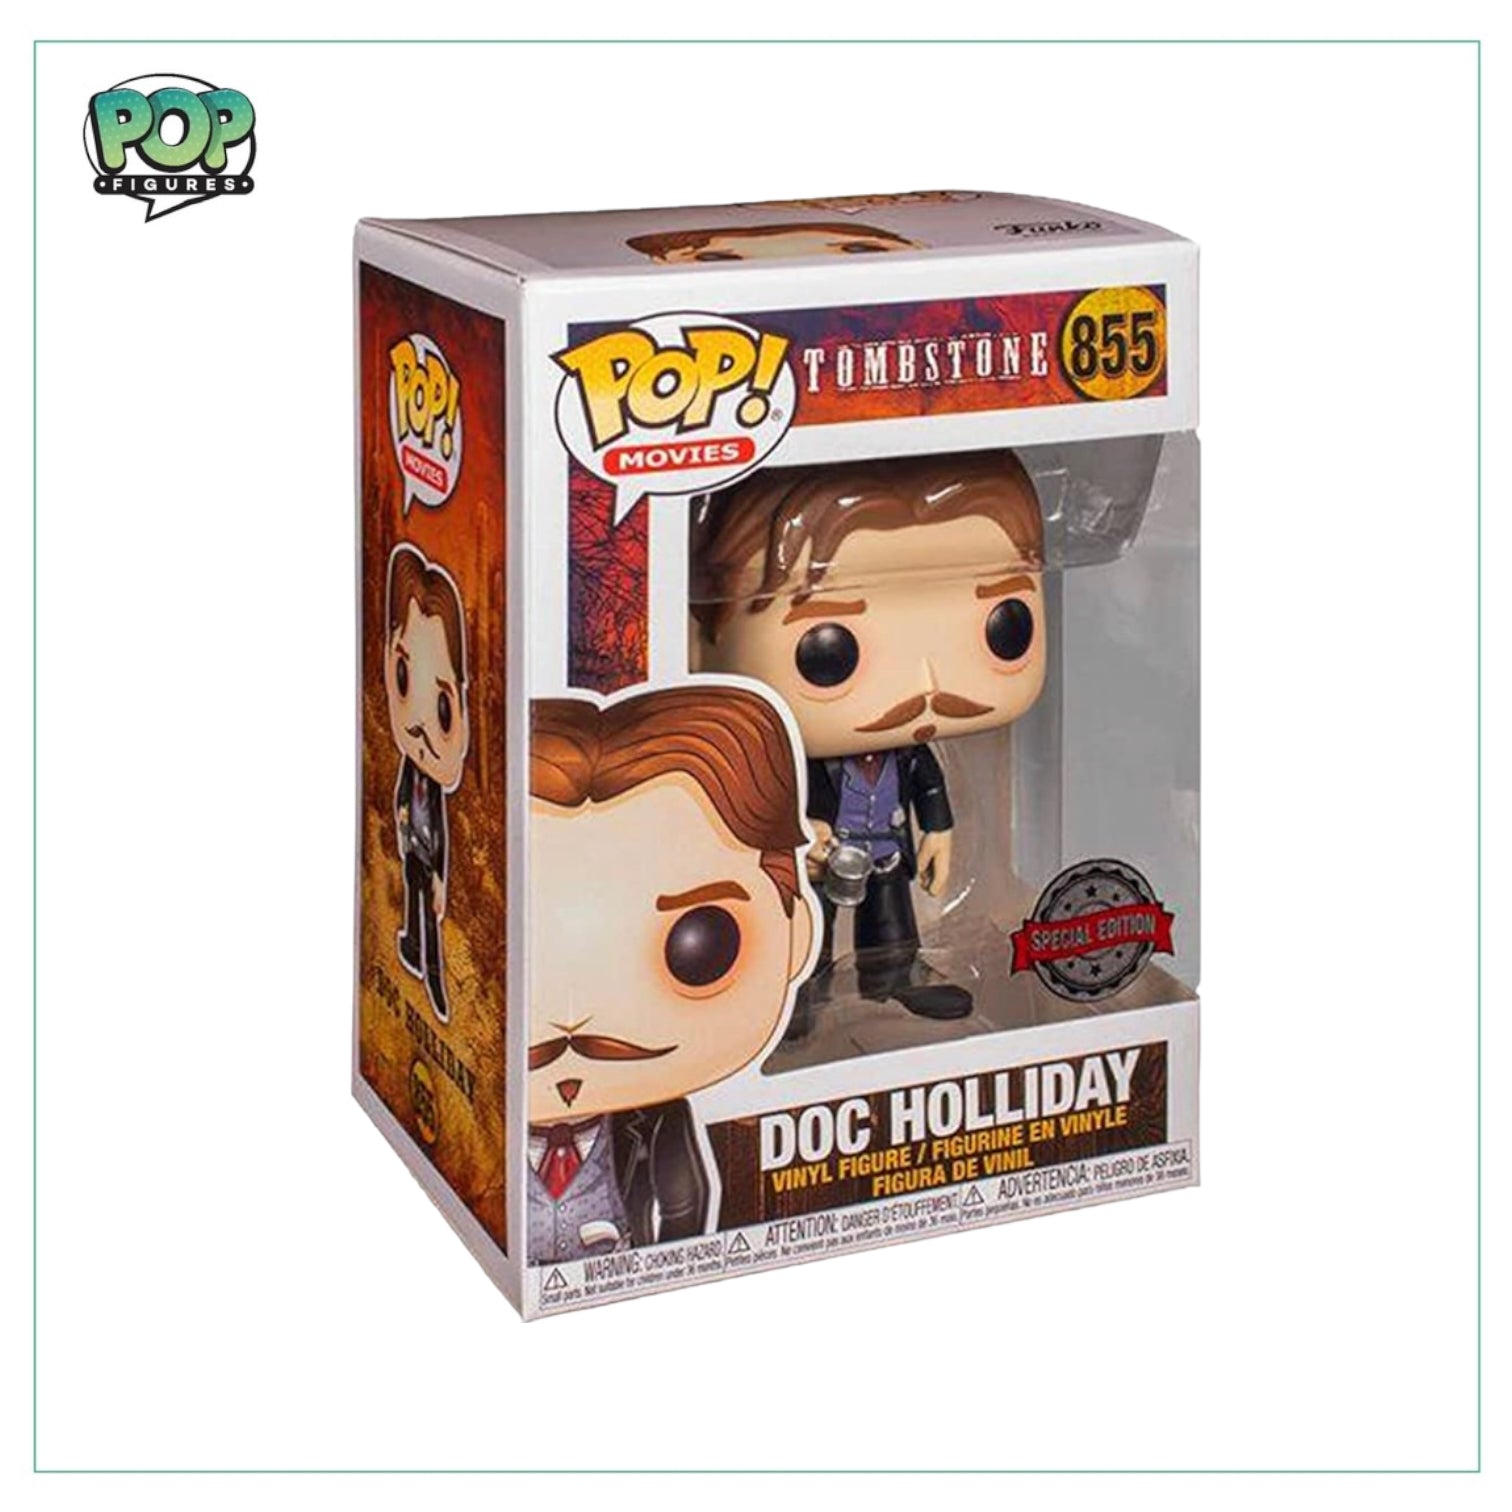 Doc Holliday #855 Funko Pop! - Tombstone - Special Edition